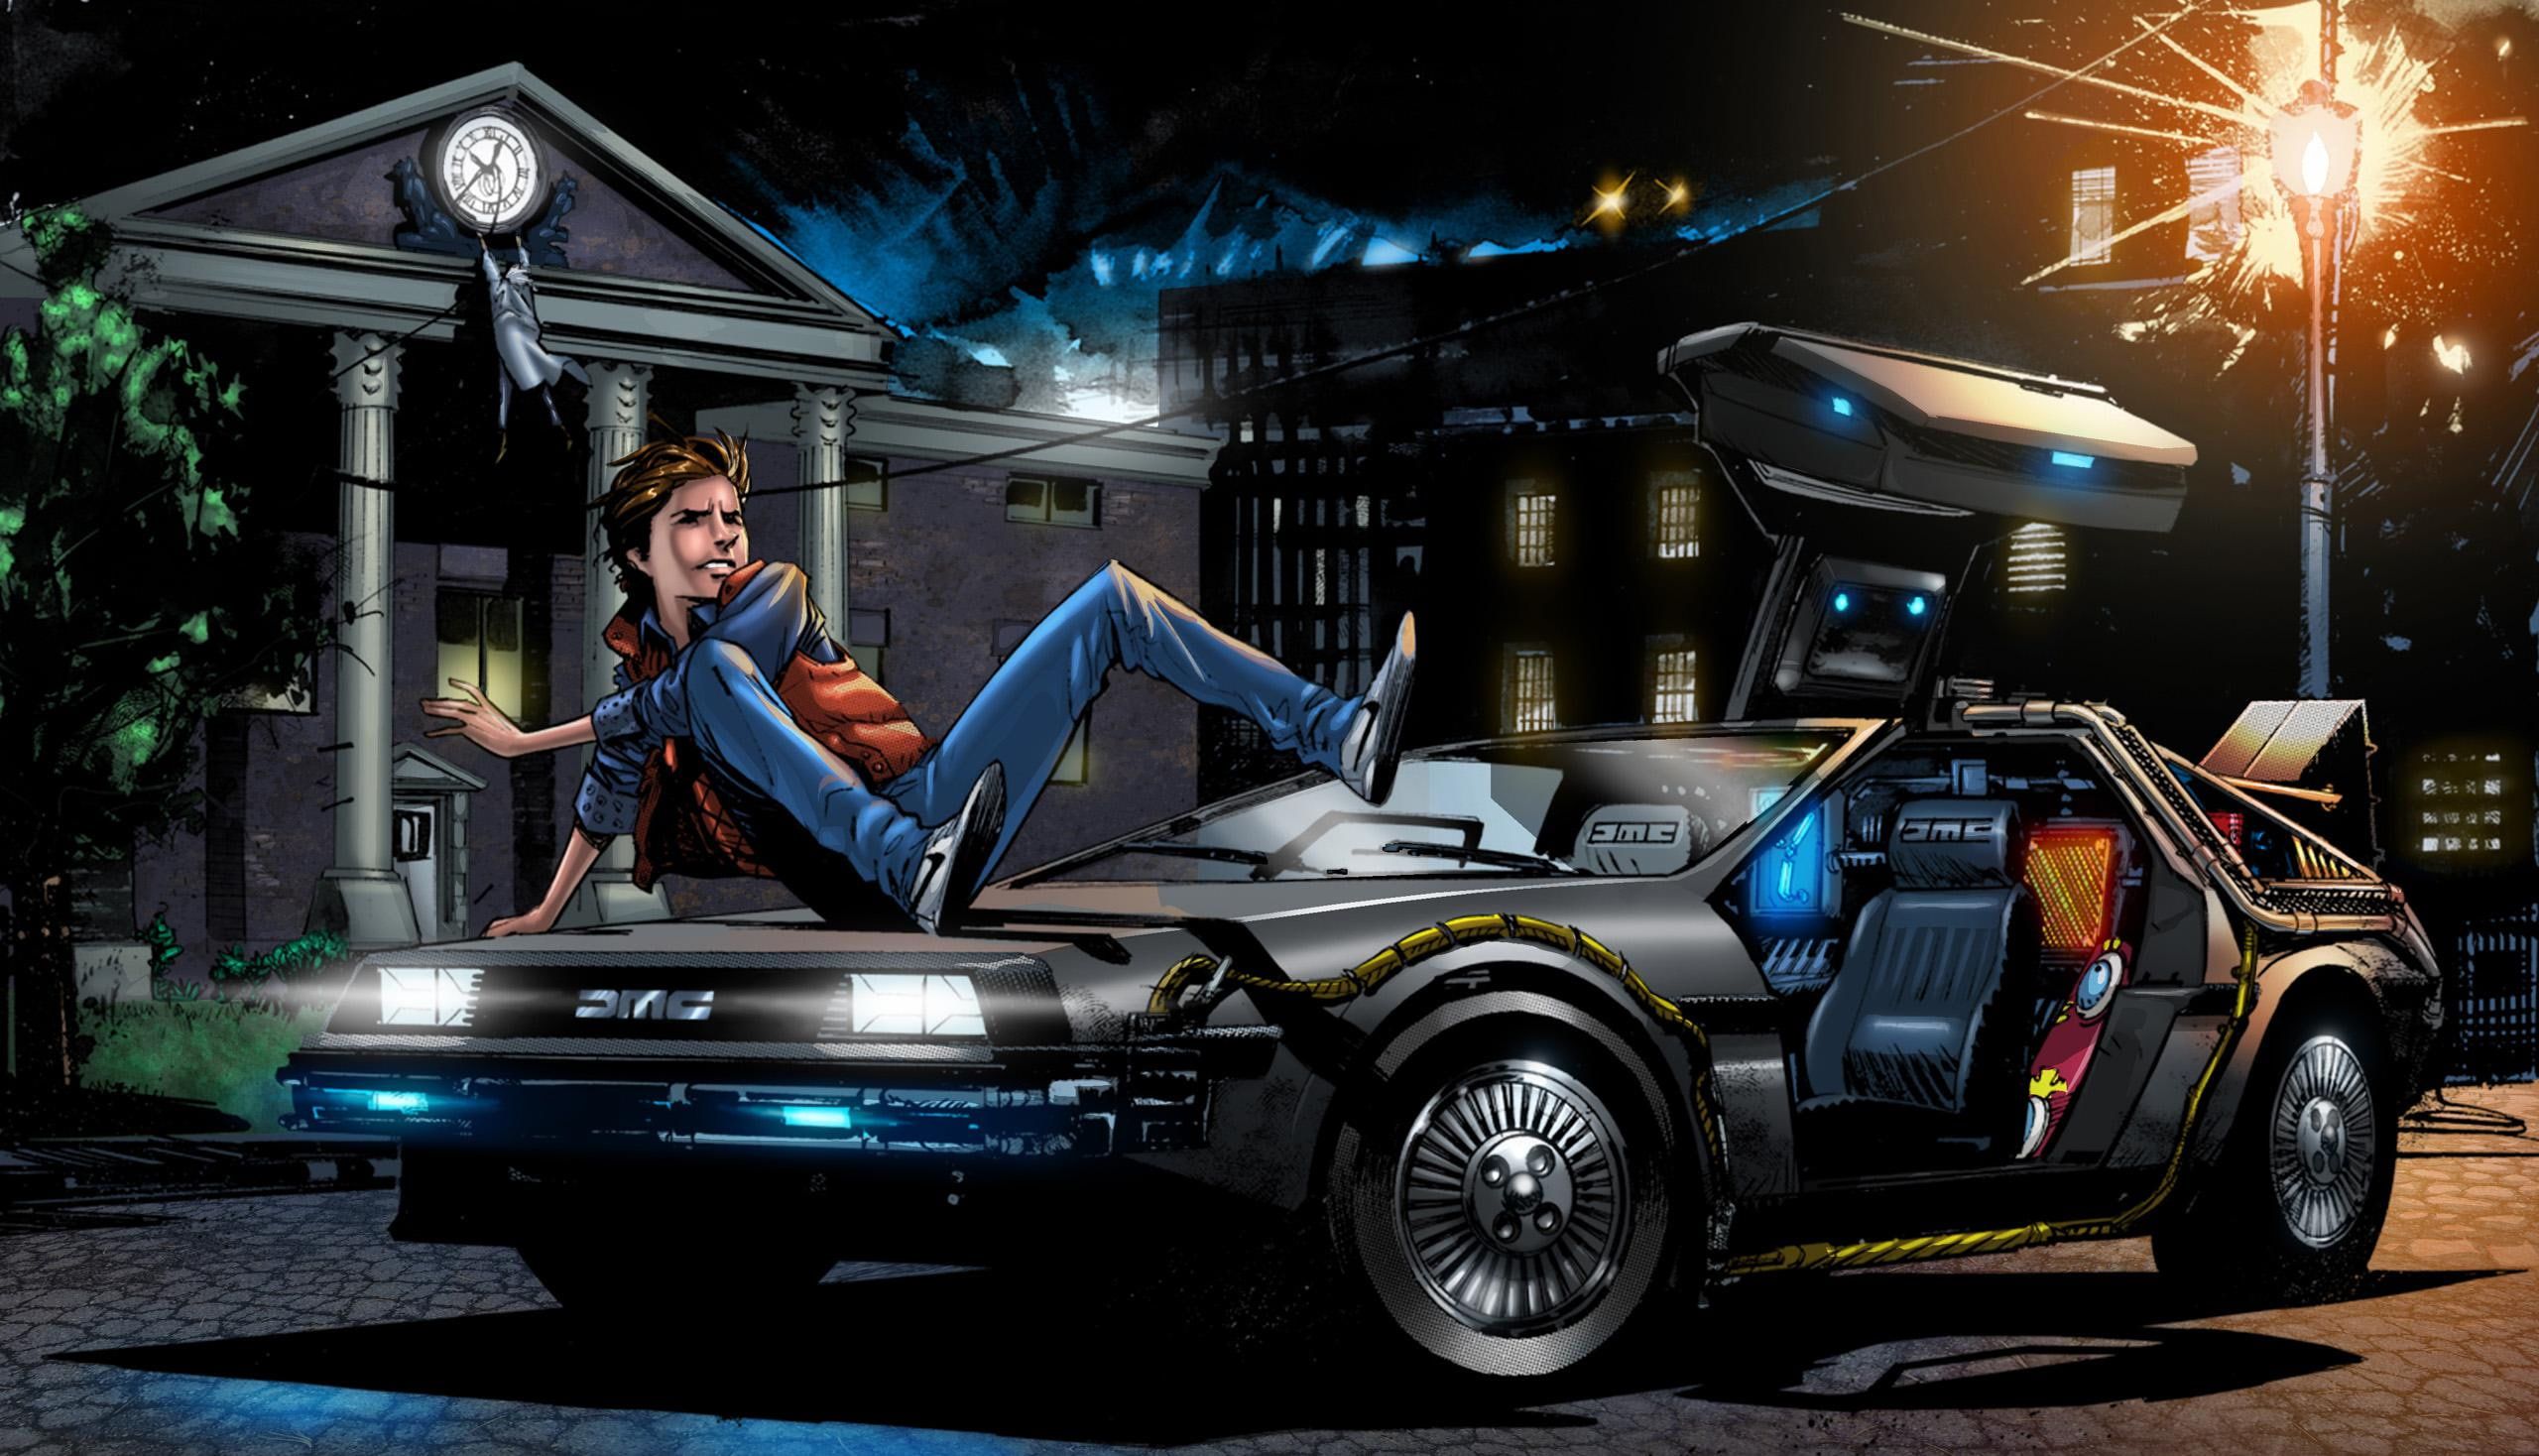 Back To The Future, Marty Mcfly, Art, Delorean Dmc Car Back To The Future Marty Mcfly Delorean Dmc 12 K #wal. Future Wallpaper, Back To The Future, Delorean